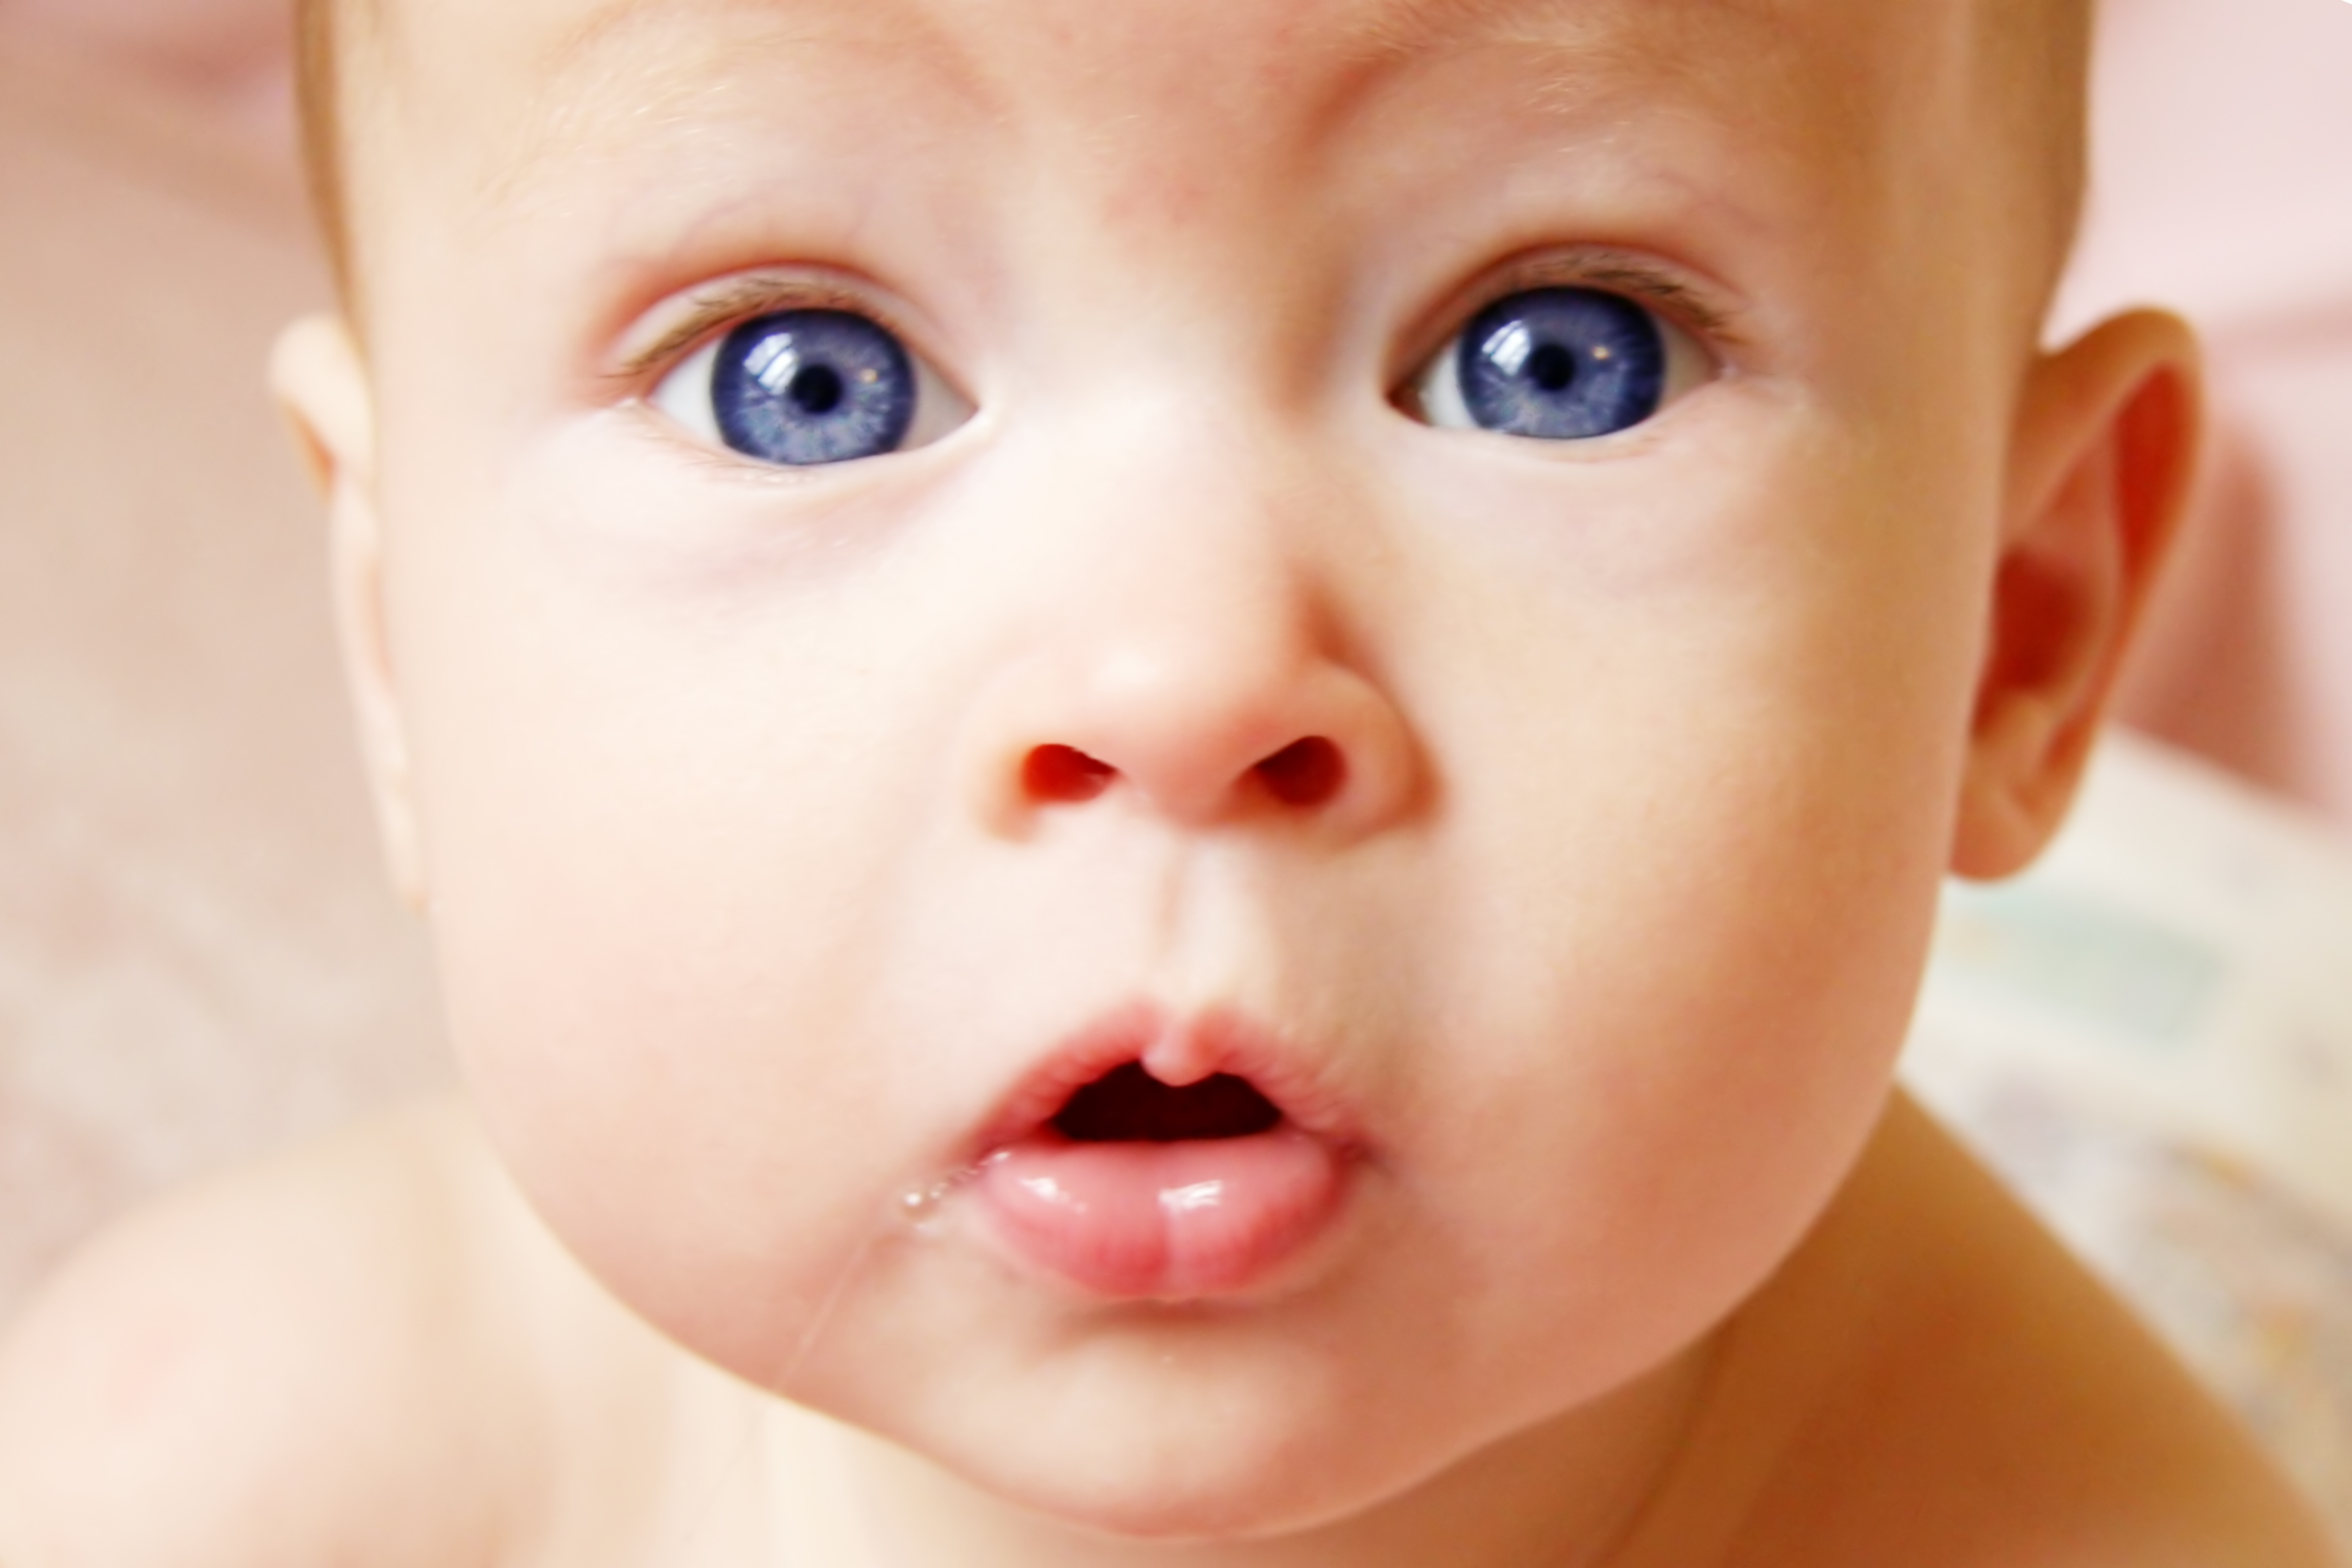 When Are Babies Eyes Color Fully Developed?